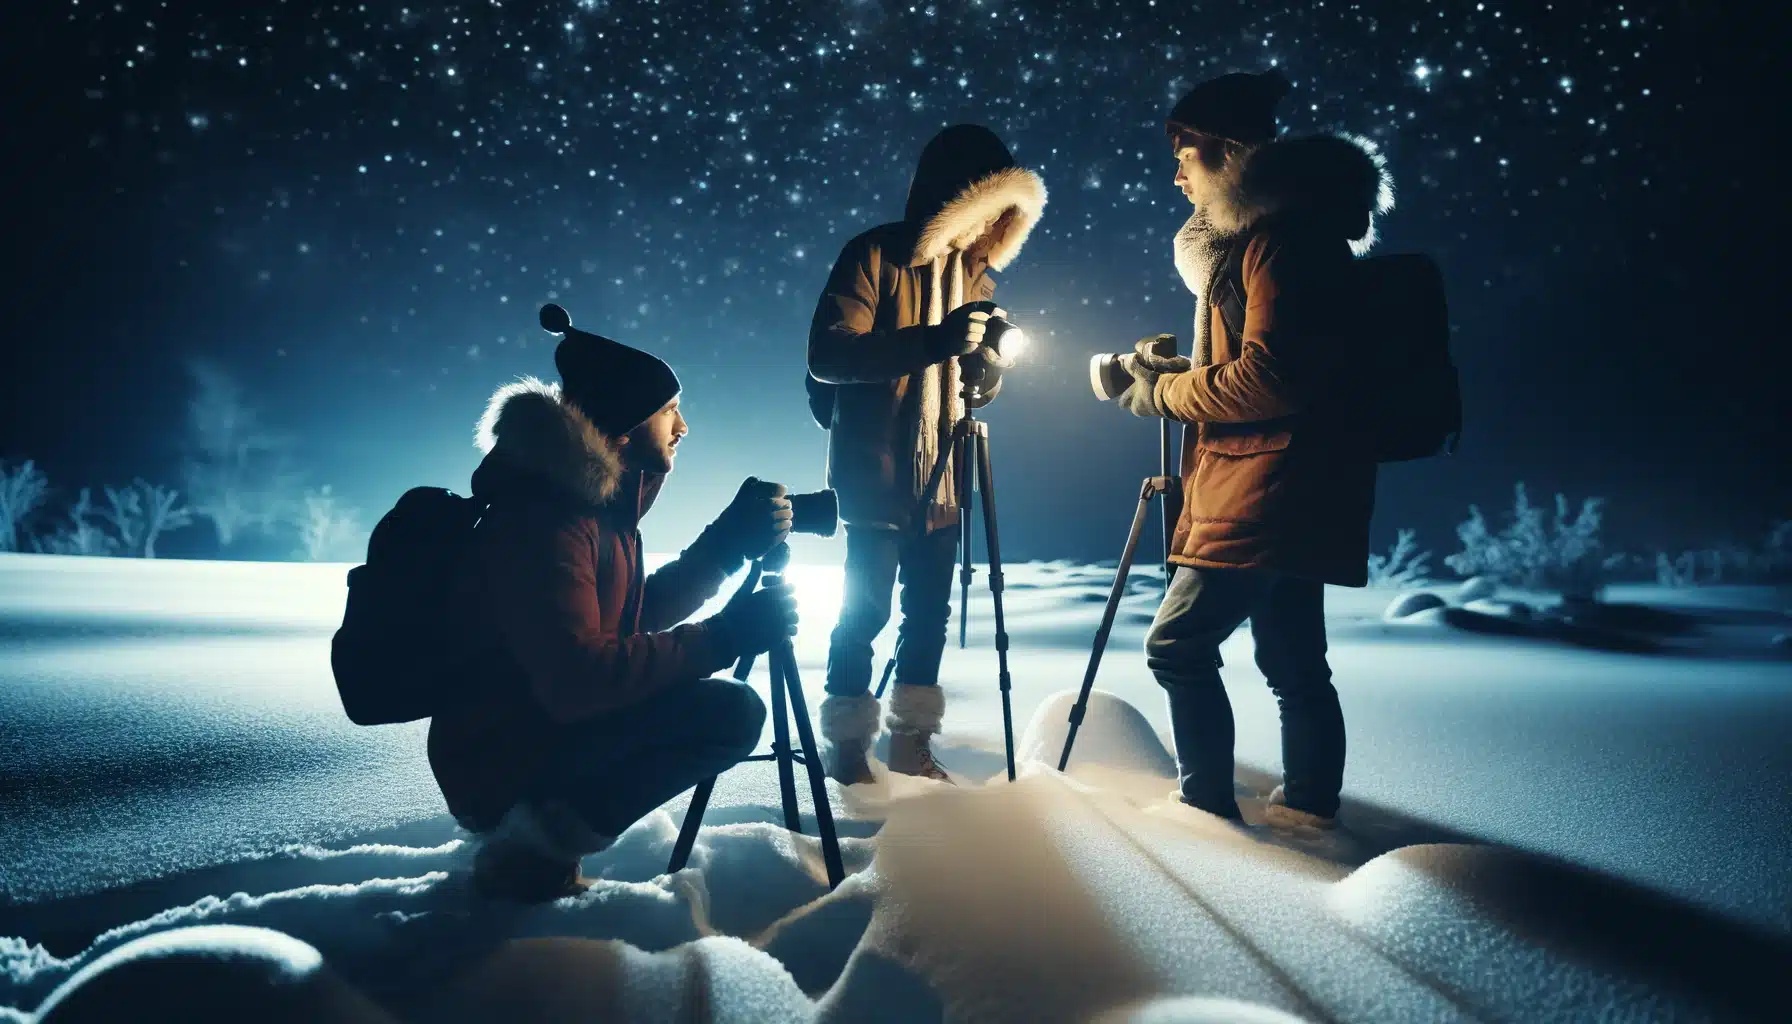 Three photographers capturing photos in the snow at night, discussing their creative ideas. They are dressed warmly and are set against a snow-covered landscape illuminated by soft, ambient lighting.